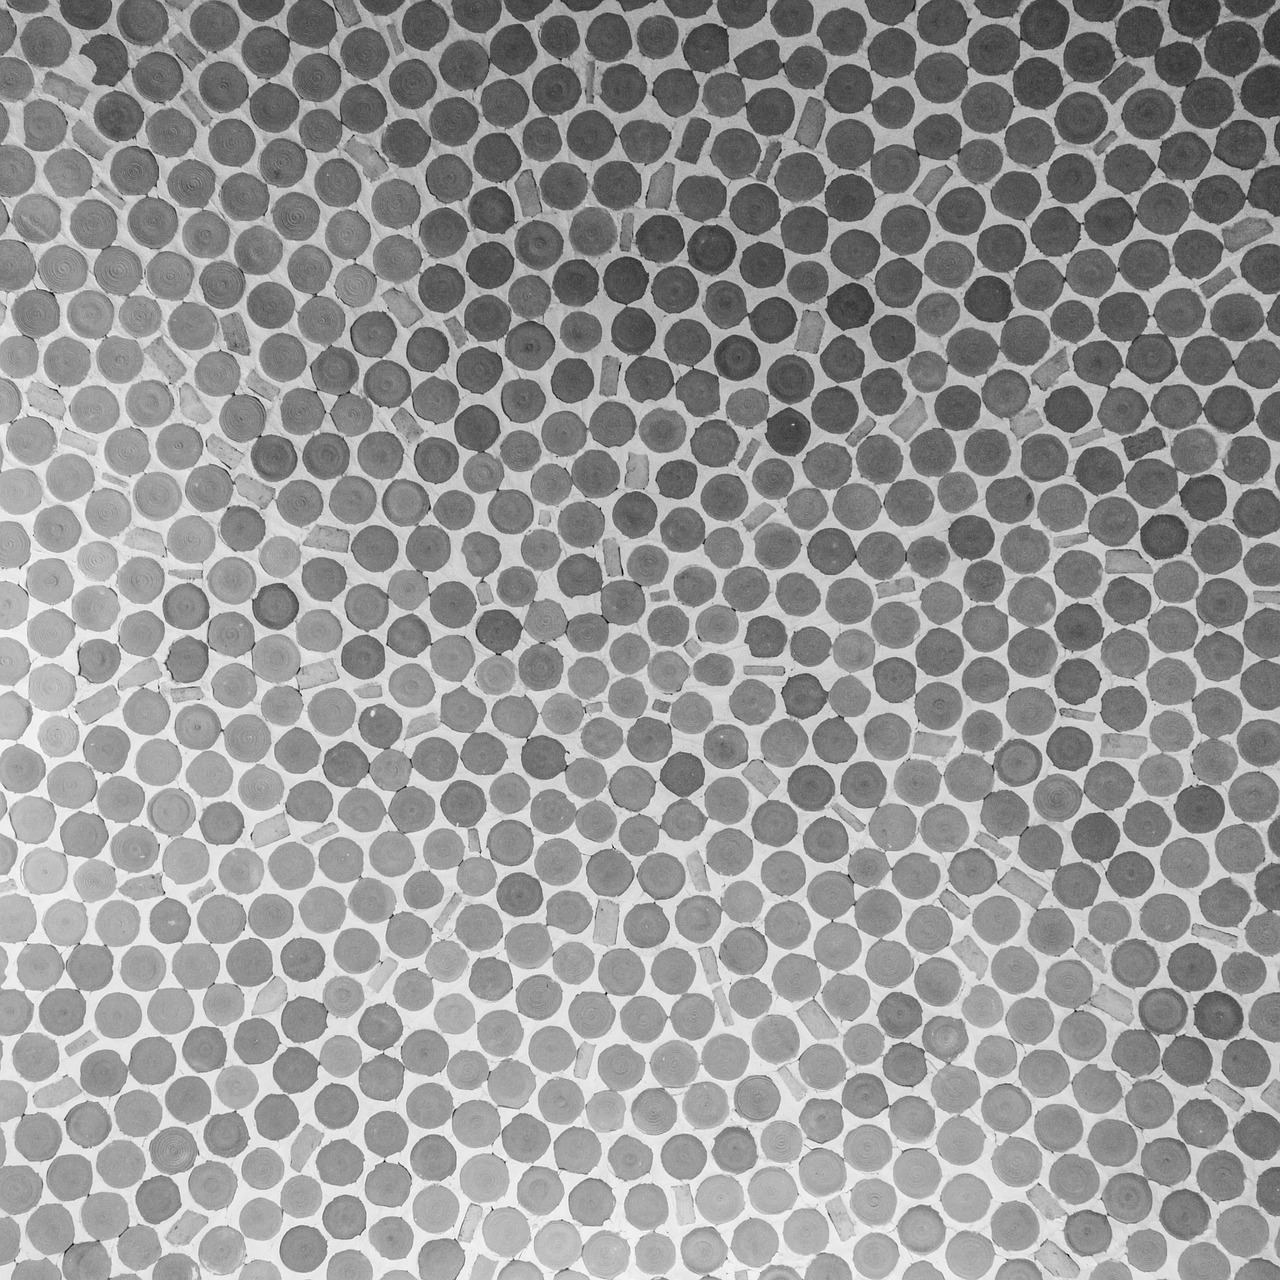 dots black and white texture free photo